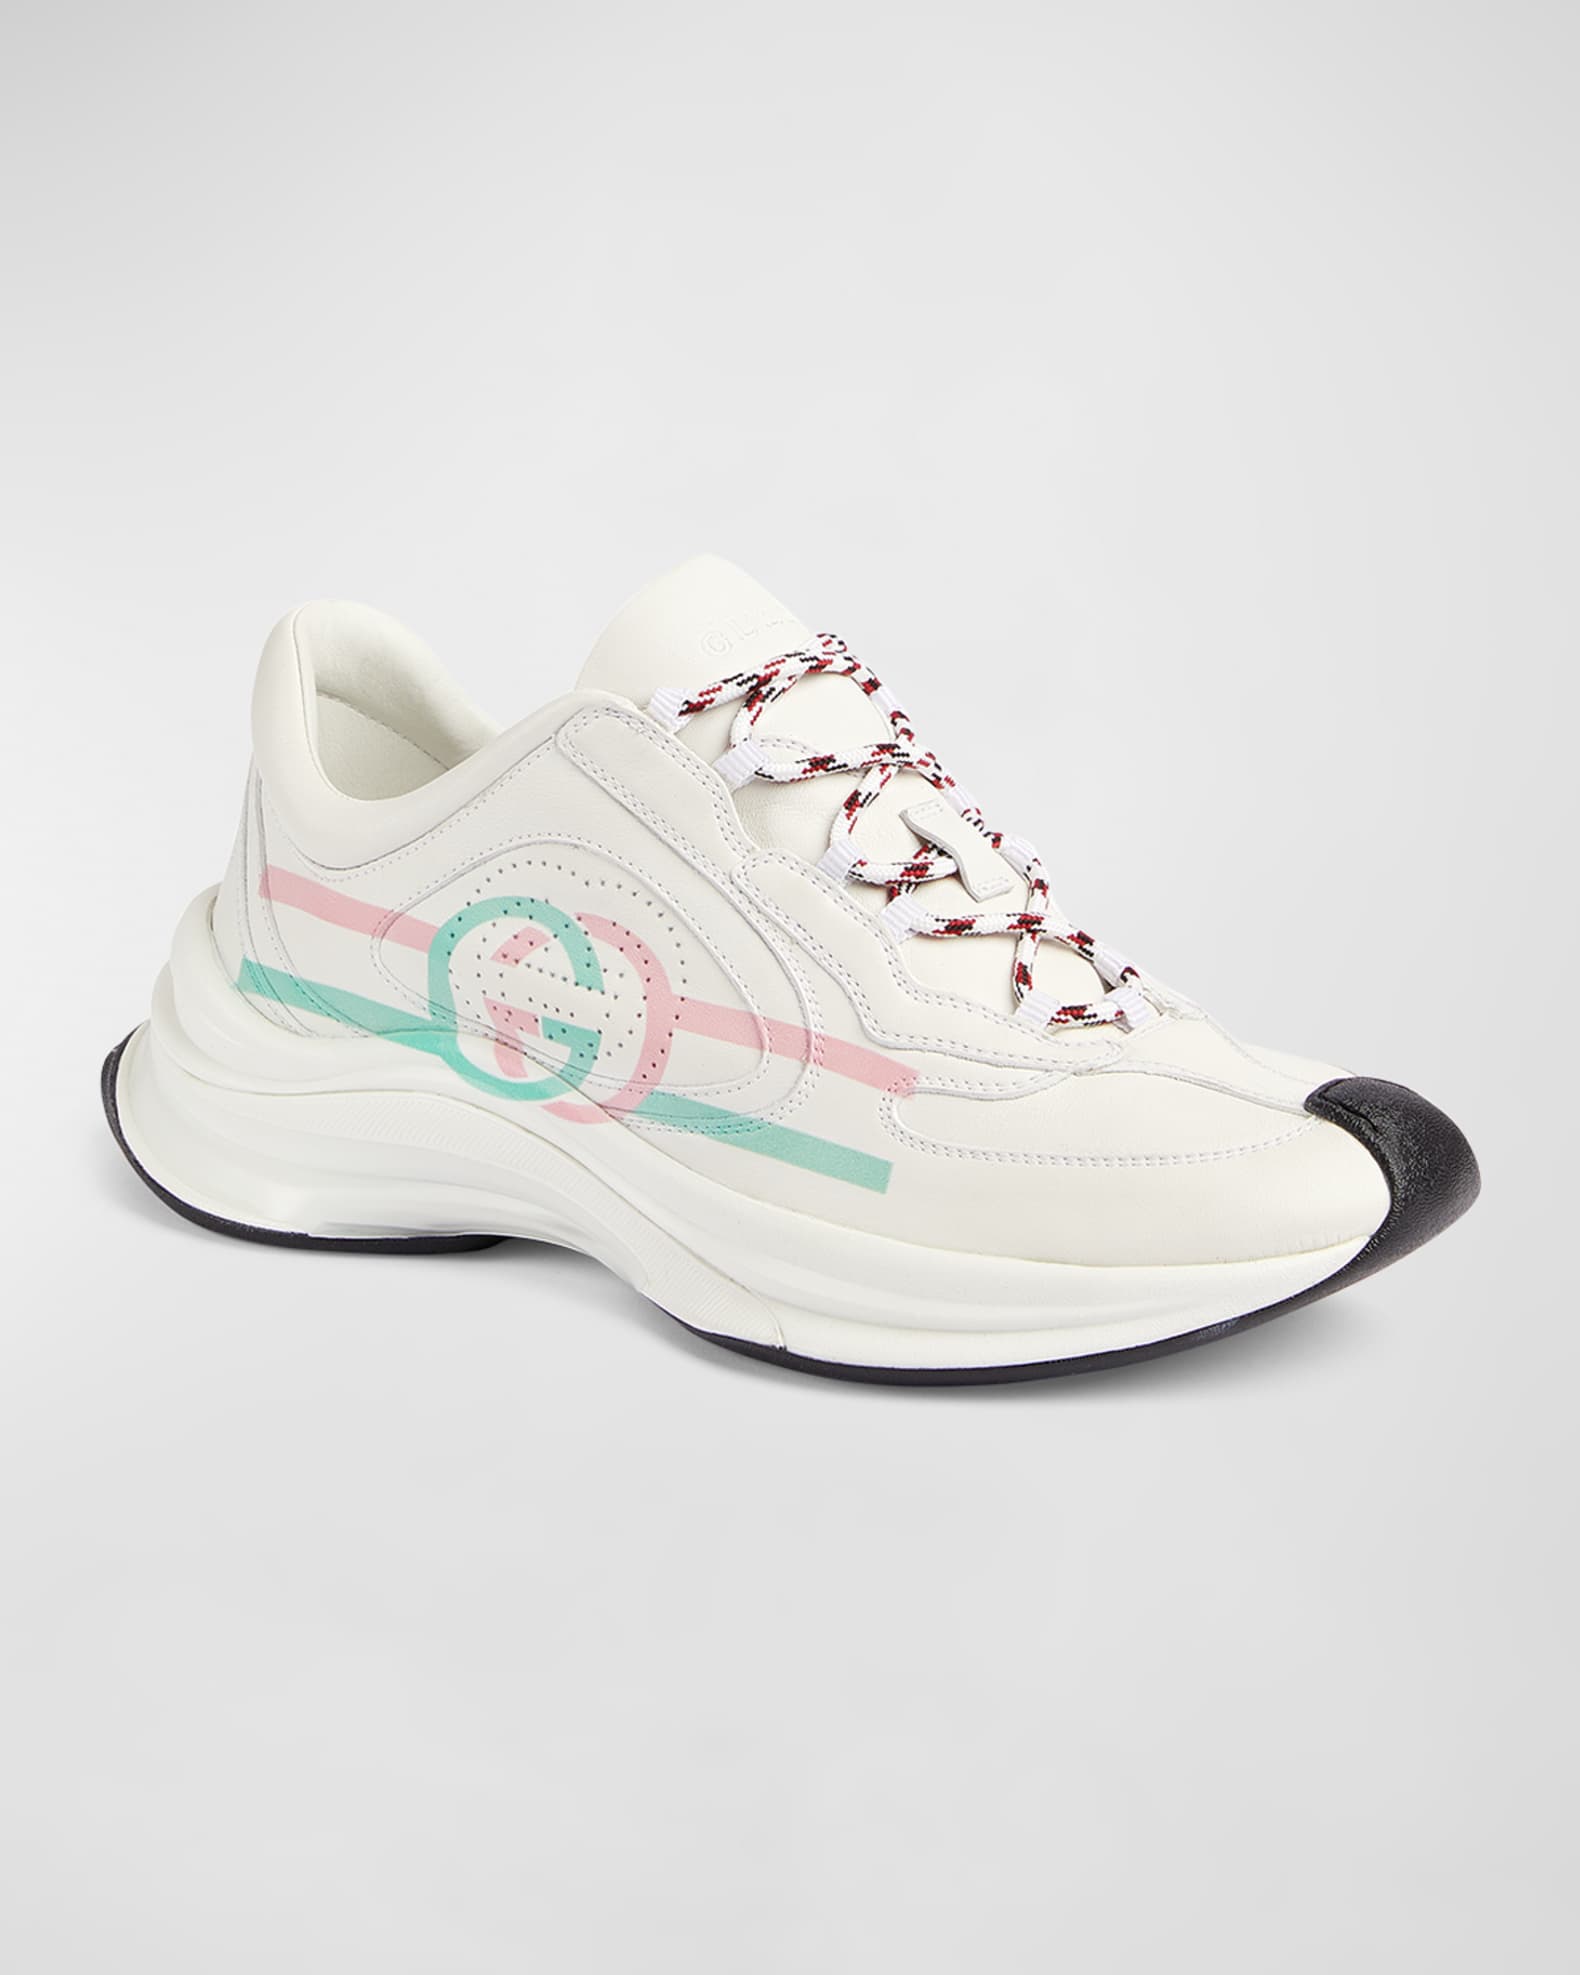 Gucci Leather Logo Multicolor Runner Sneakers | Neiman Marcus